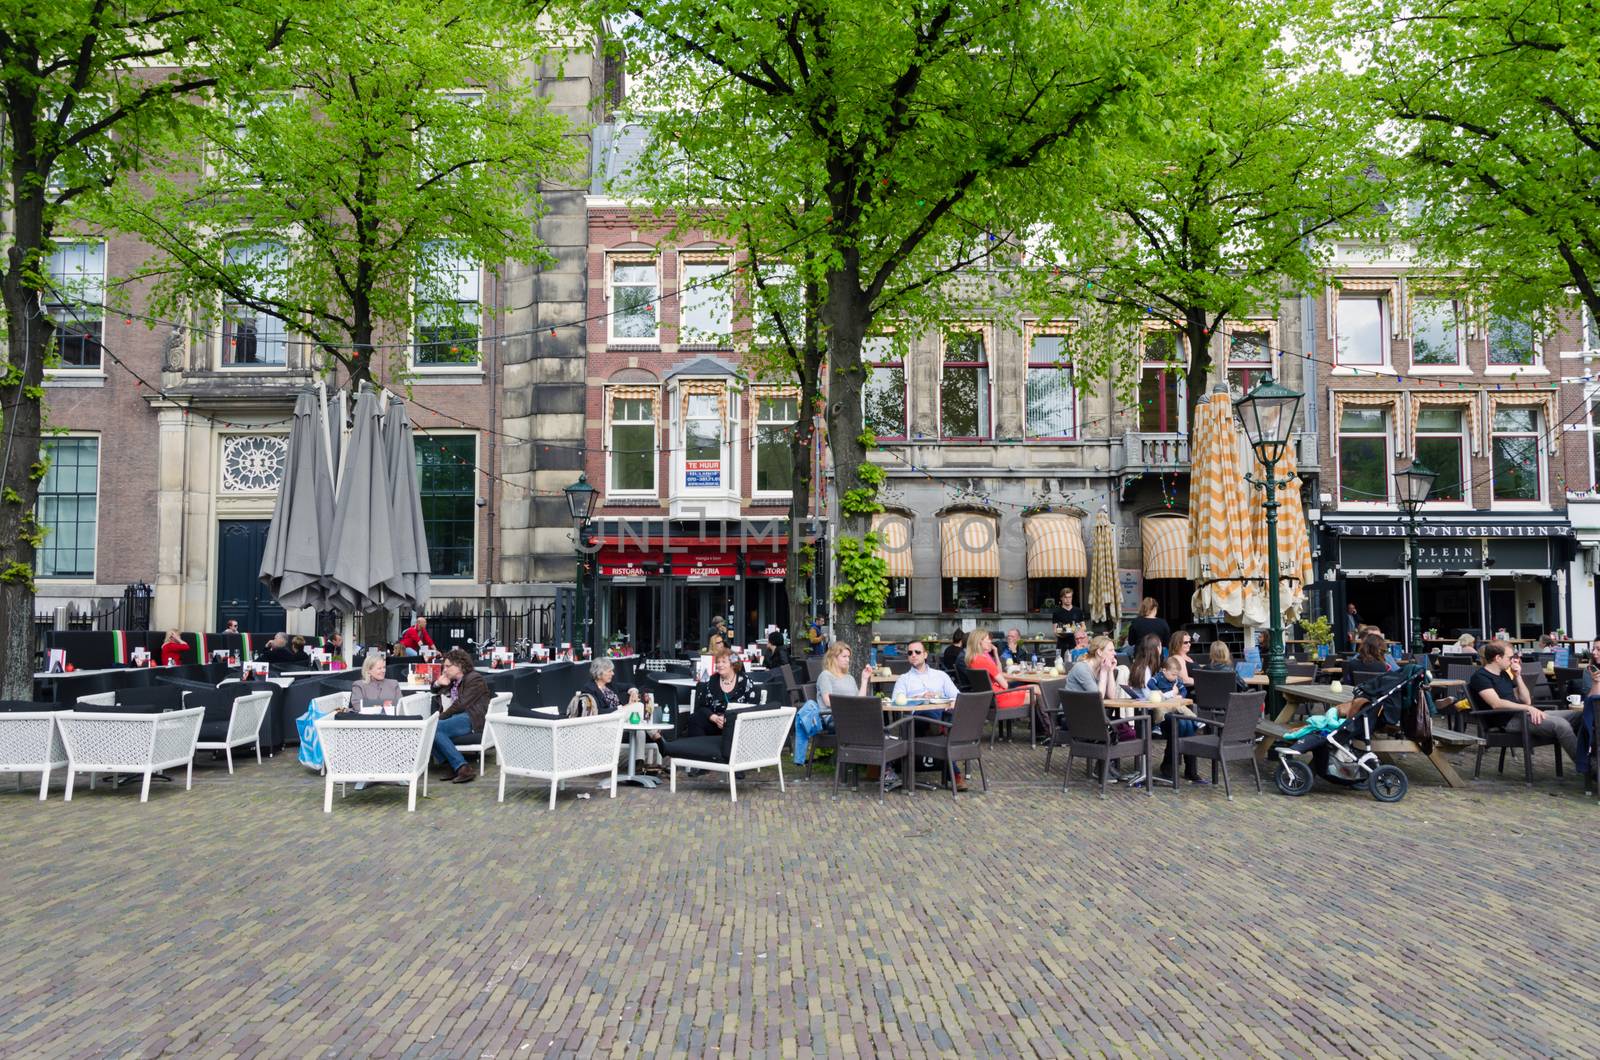 The Hague, Netherlands - May 8, 2015: Dutch People at Cafeteria in Het Plein in The Hague by siraanamwong